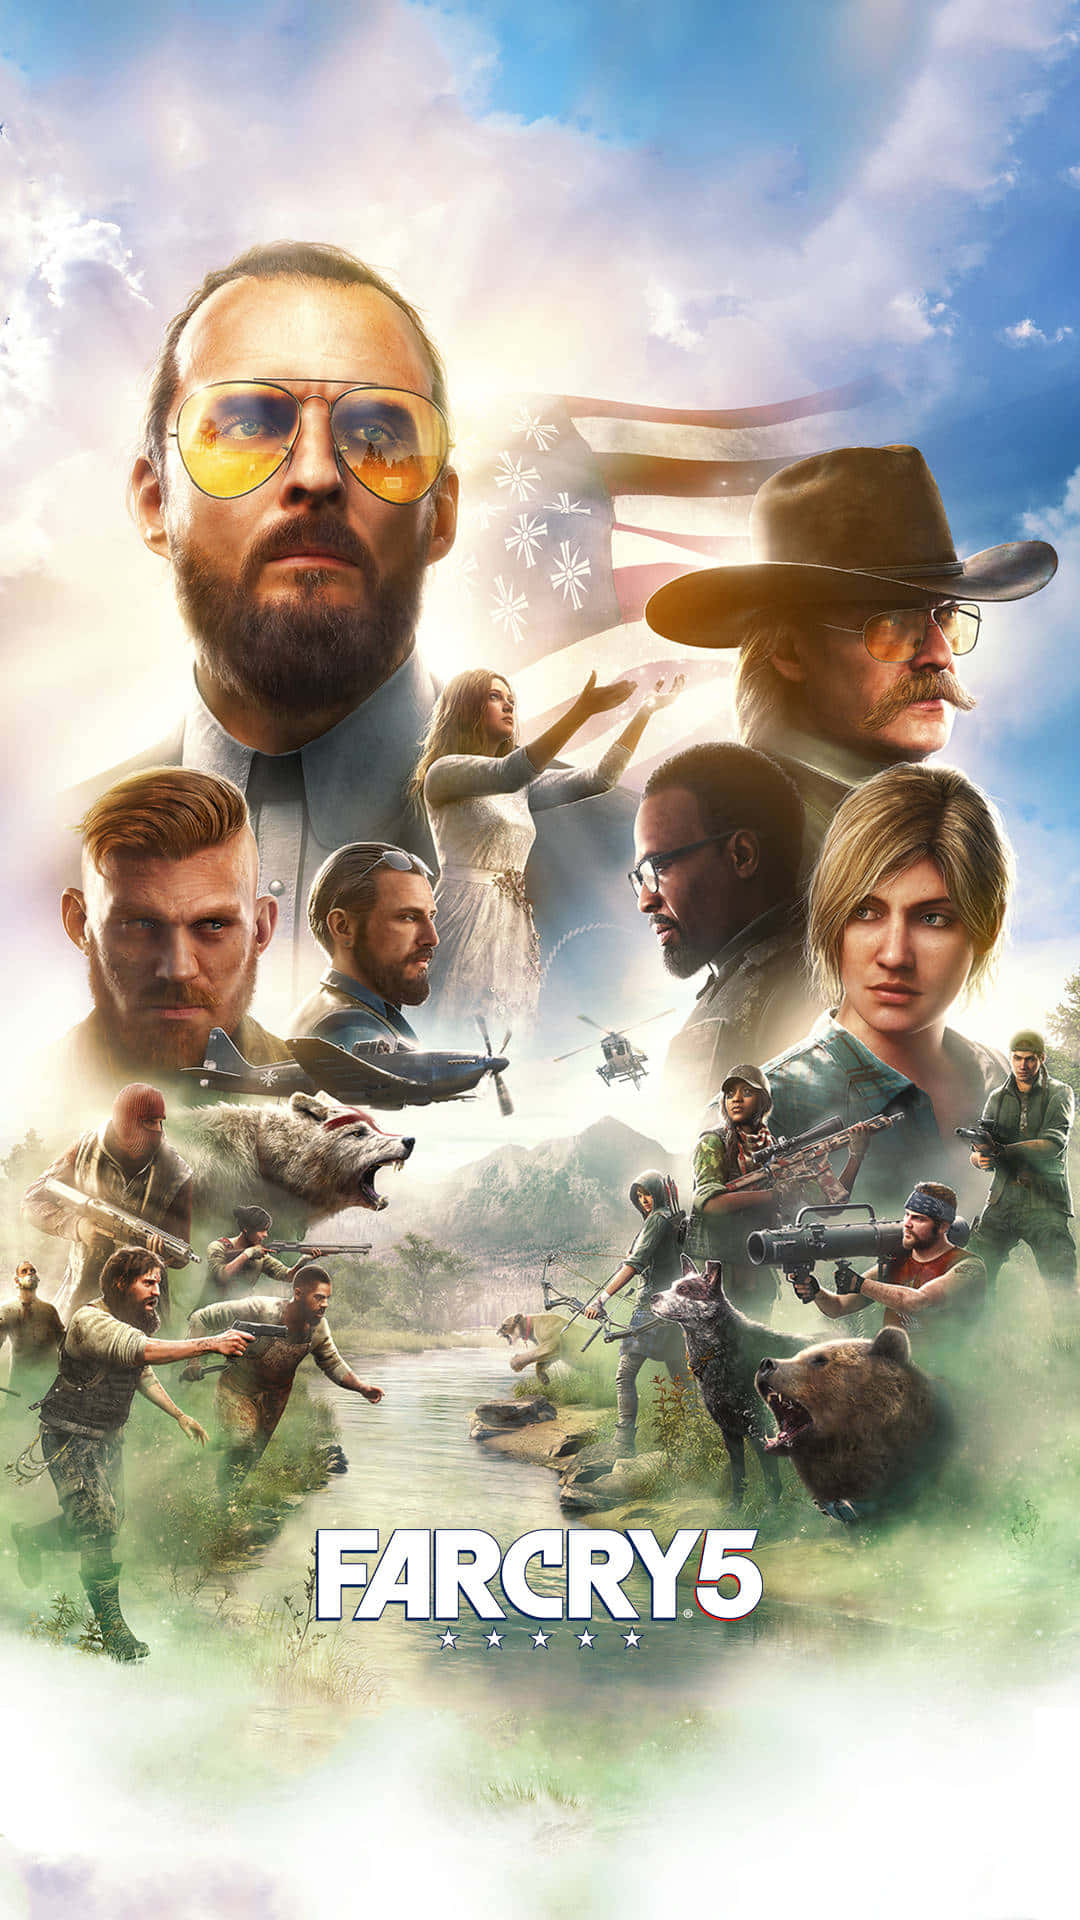 far cry 4 poster